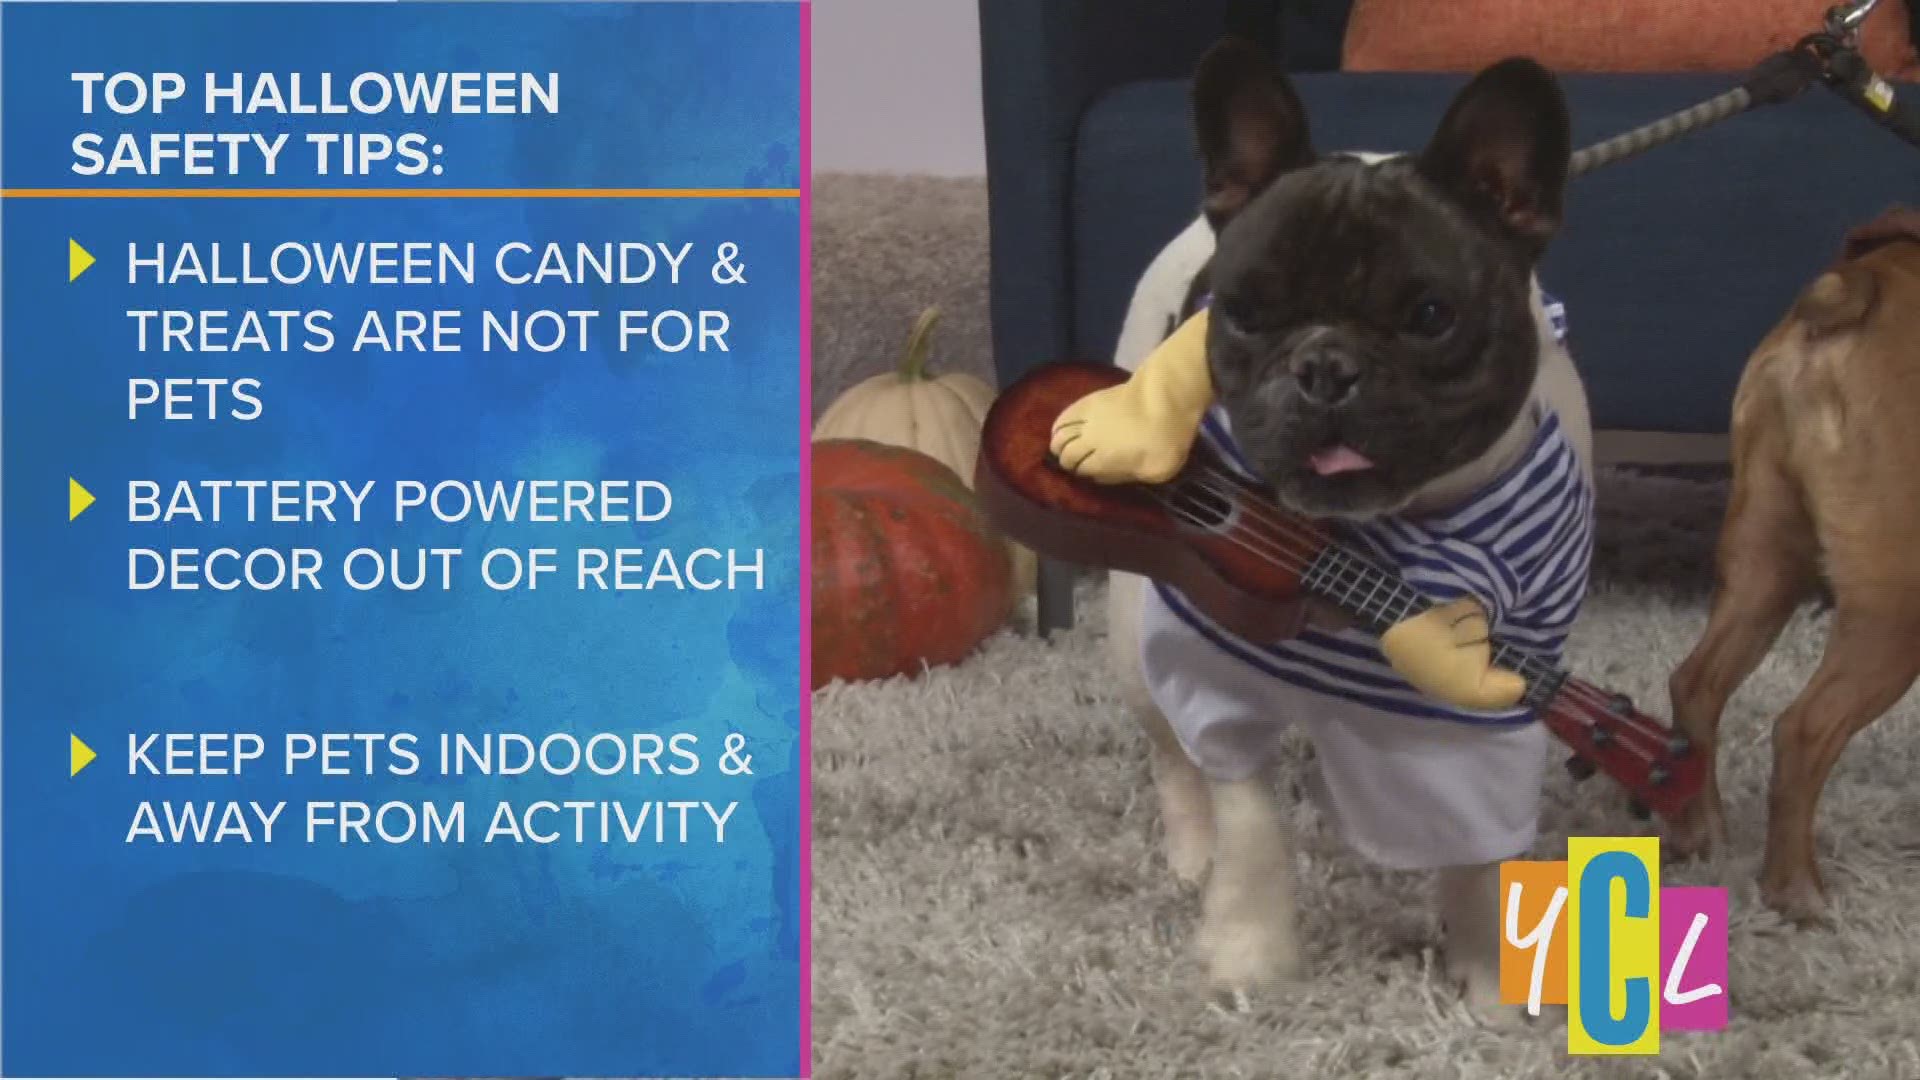 Aubrey Aquino chats with Veterinarian Lisa Hess about how you can keep your pets safe this Halloween while still having fun.